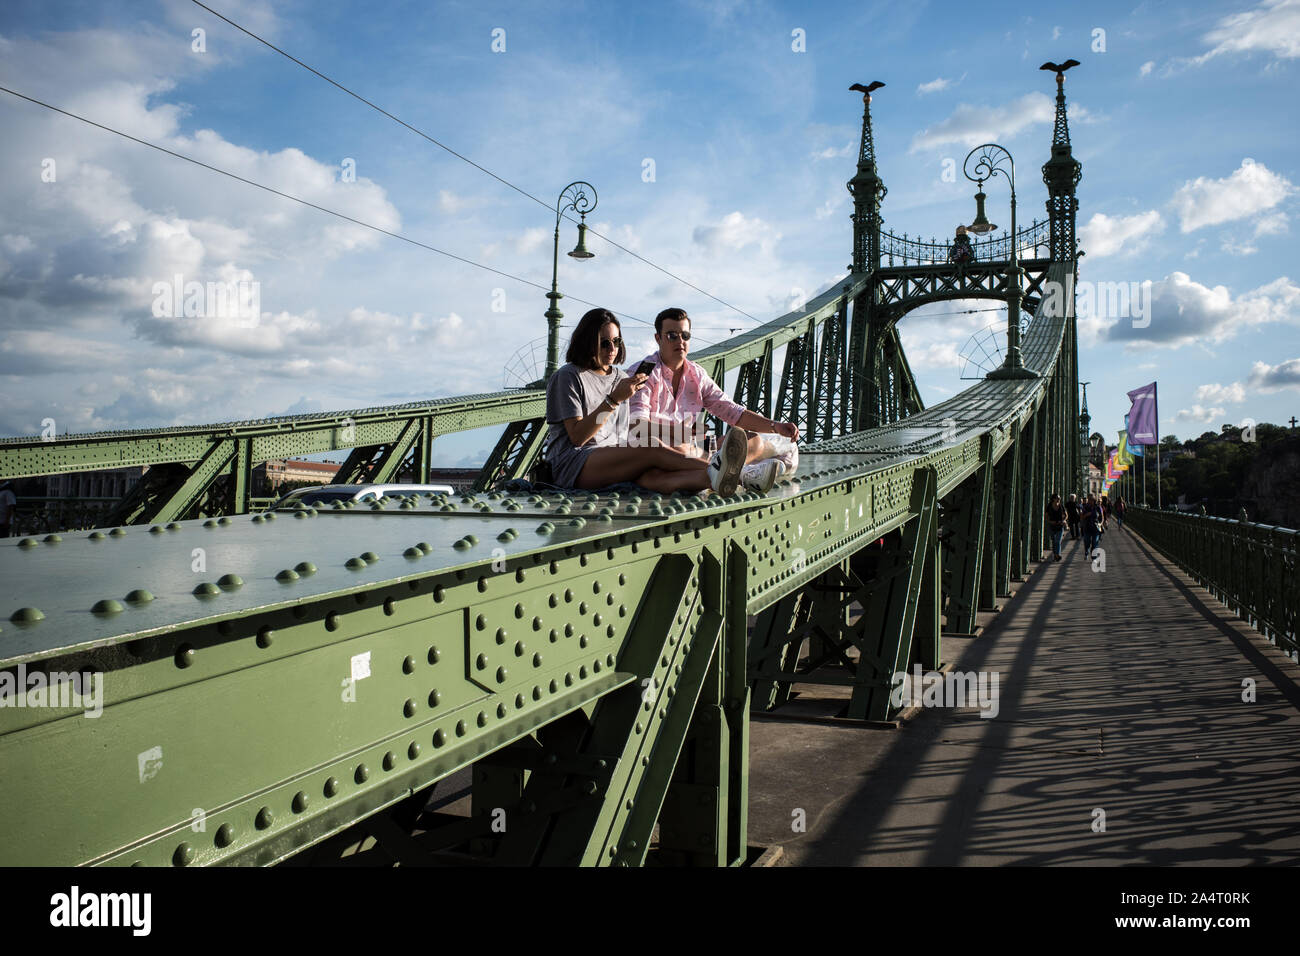 SZABADSAG HID BRIDGE BUDAPEST - 1894-1896 DESIGNED BY ARCHITECT JANOS FEKETEHAZY -  LOVERS SEATING ON THE IRON BRIDGE STRUCTURE DURING A SUNNY DAY - BUDAPEST CITY - BUDAPEST BRIDGE - BUDAPEST STREET PHOTOGRAPHY - HUNGARY © Frédéric BEAUMONT Stock Photo